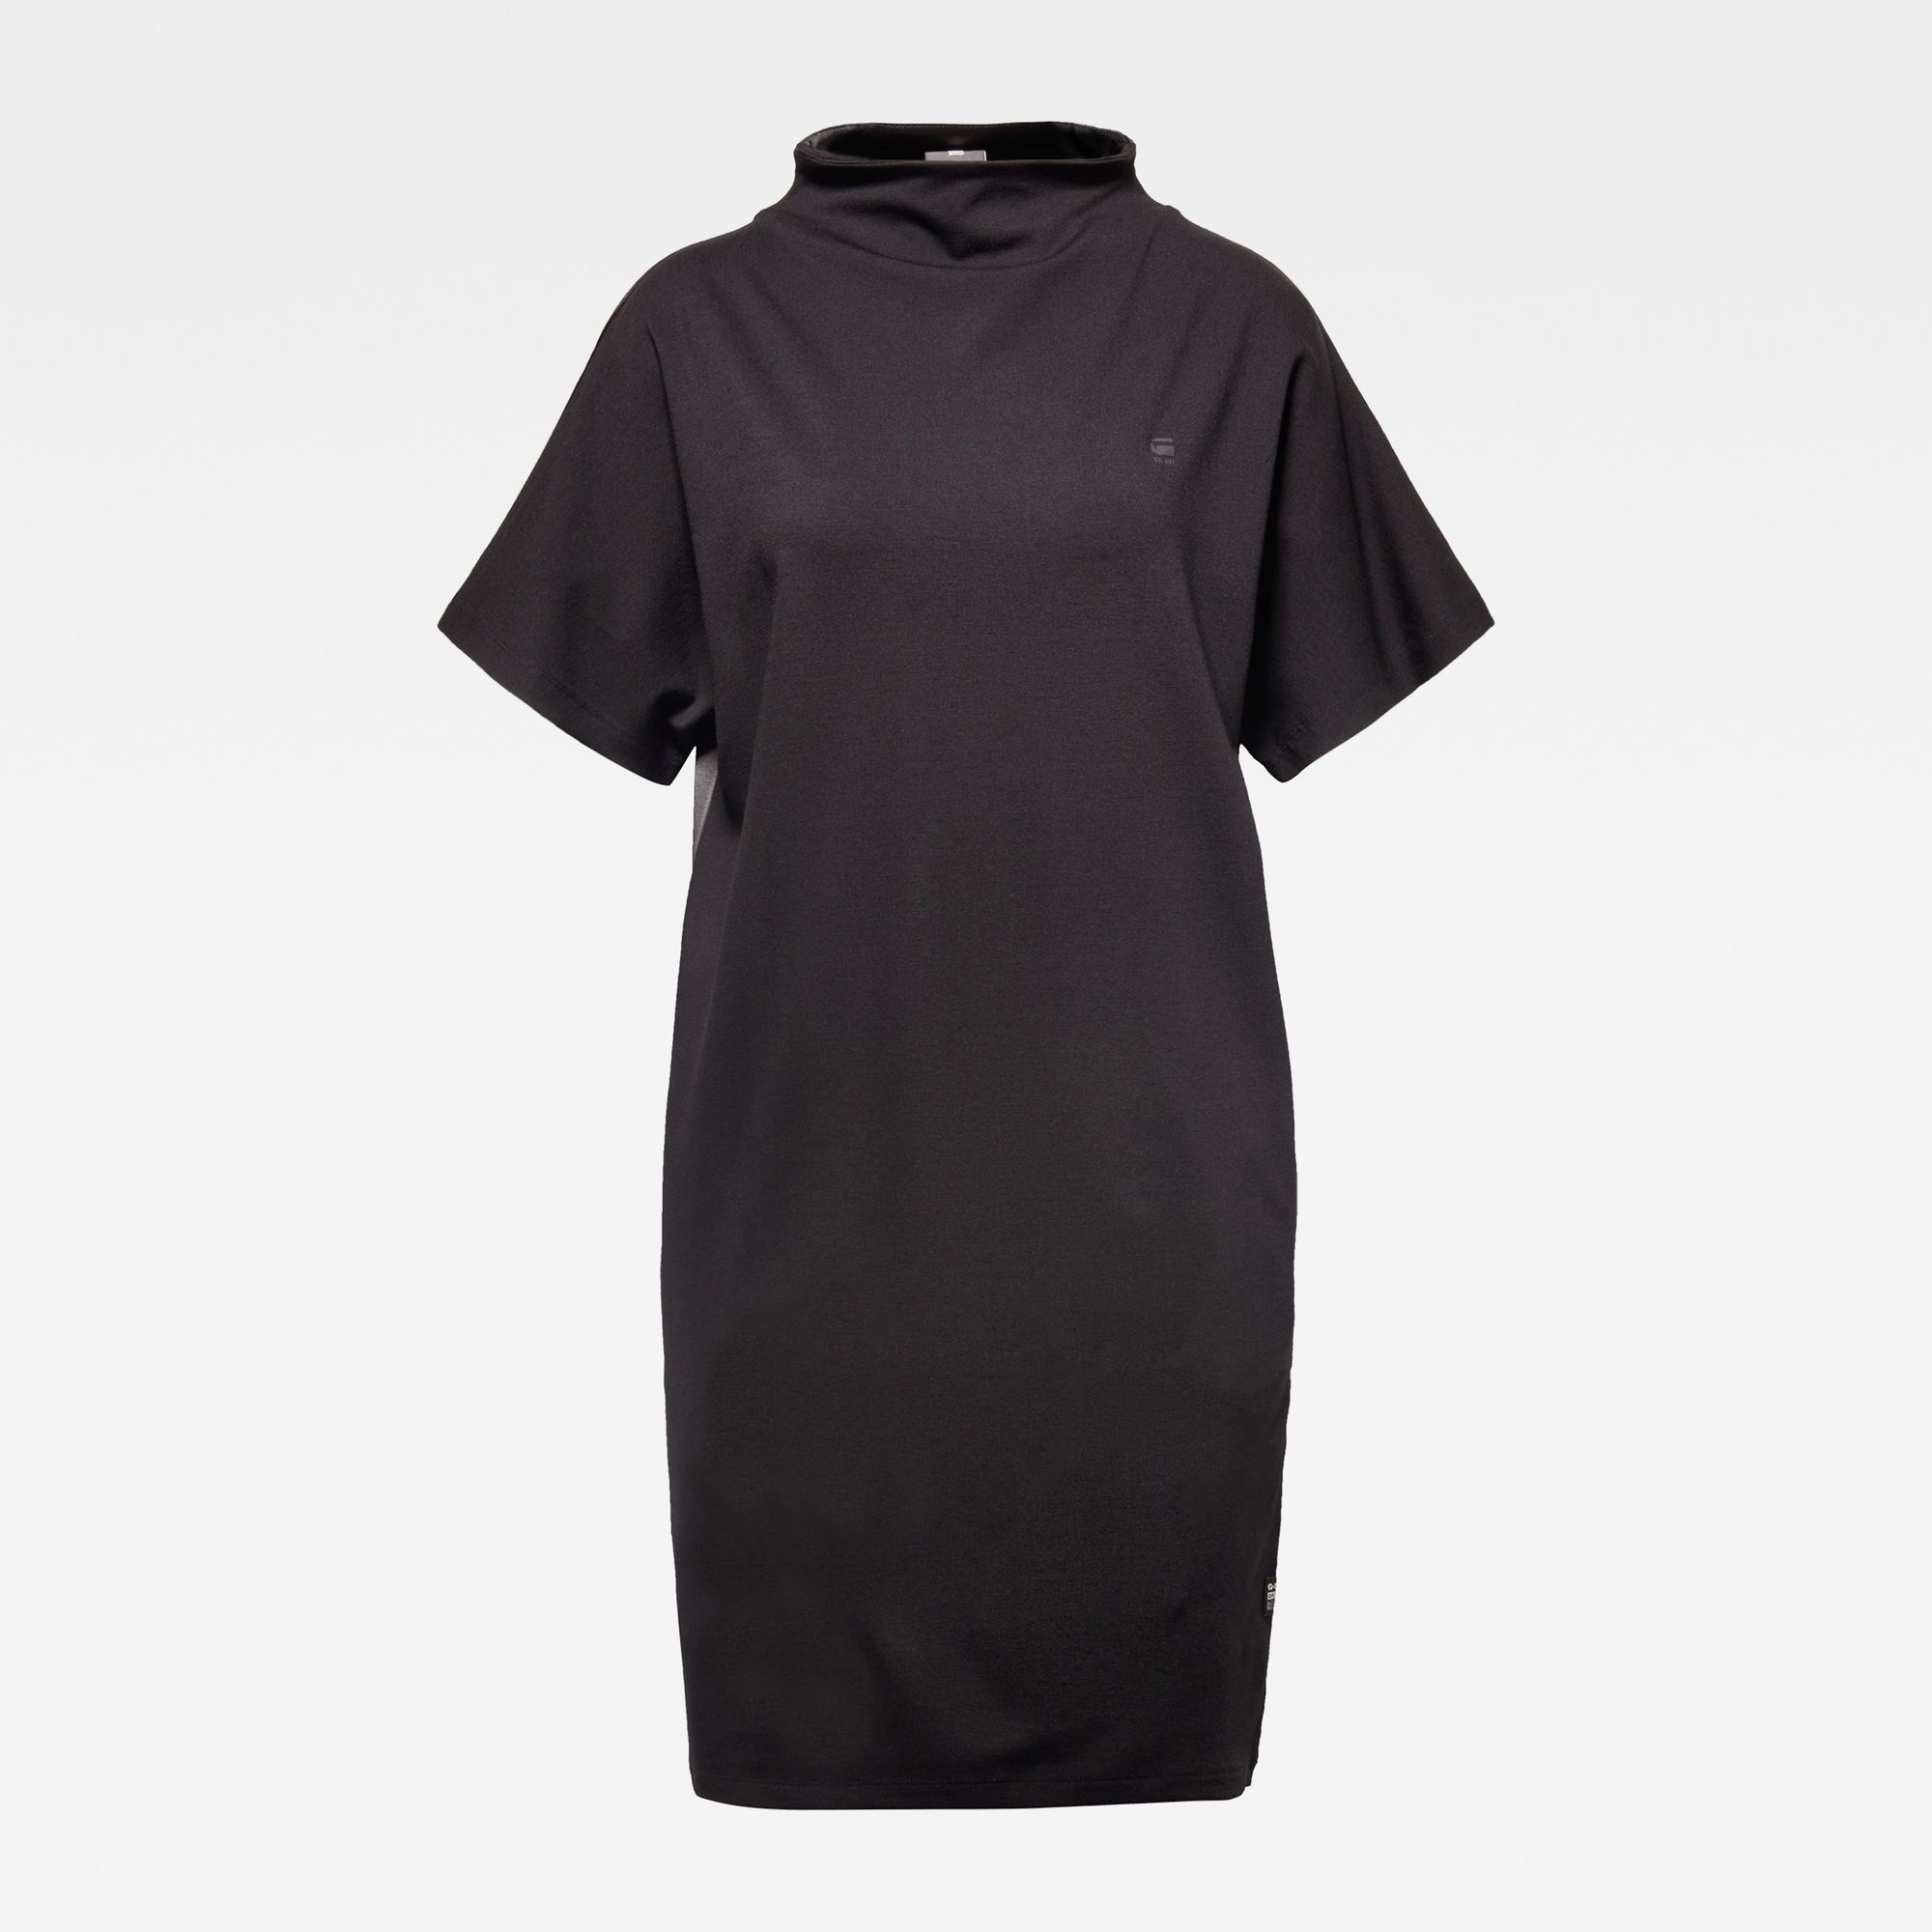 Matt front versus shiny back. Raised collar, funnel neck. Semi short sleeves- grown on. Side seam pockets. Straight hem. No closure. This dress is created out of a high stretch fabric with a sateen luster. Soft touch, supple knit. Added stretch for eas of movement. Straight